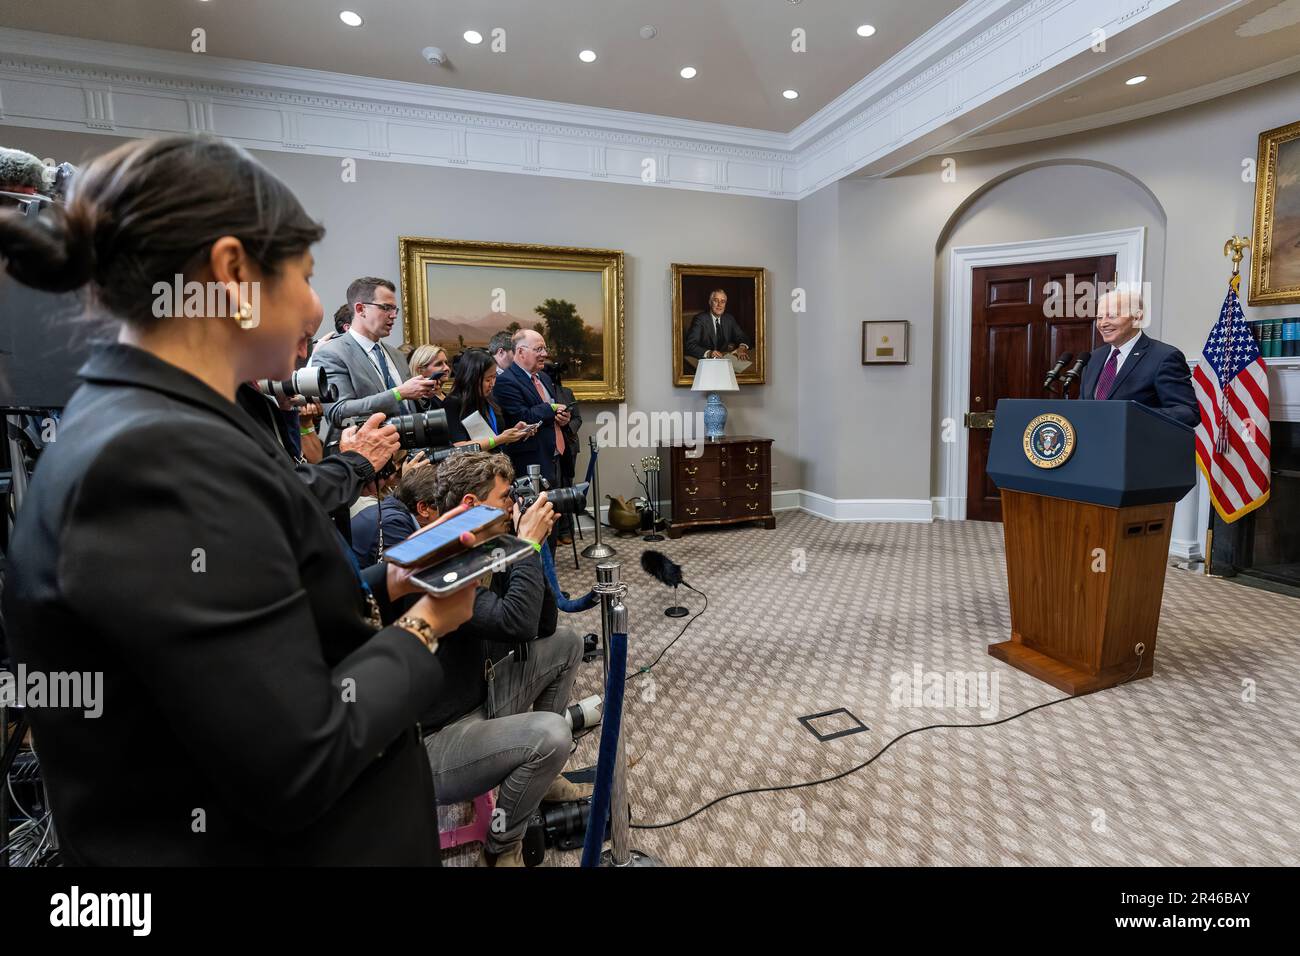 President Joe Biden delivers remarks regarding his meeting with Senate Majority Leader Chuck Schumer (D-NY), Minority Leader Mitch McConnell (R-KY), House Speaker Kevin McCarthy (R-CA) and House Minority Leader Hakeem Jeffries (D-NY) about the debt ceiling, Tuesday, May 9, 2023, in the Roosevelt Room of the White House. (Official White House Photo by Cameron Smith) Stock Photo